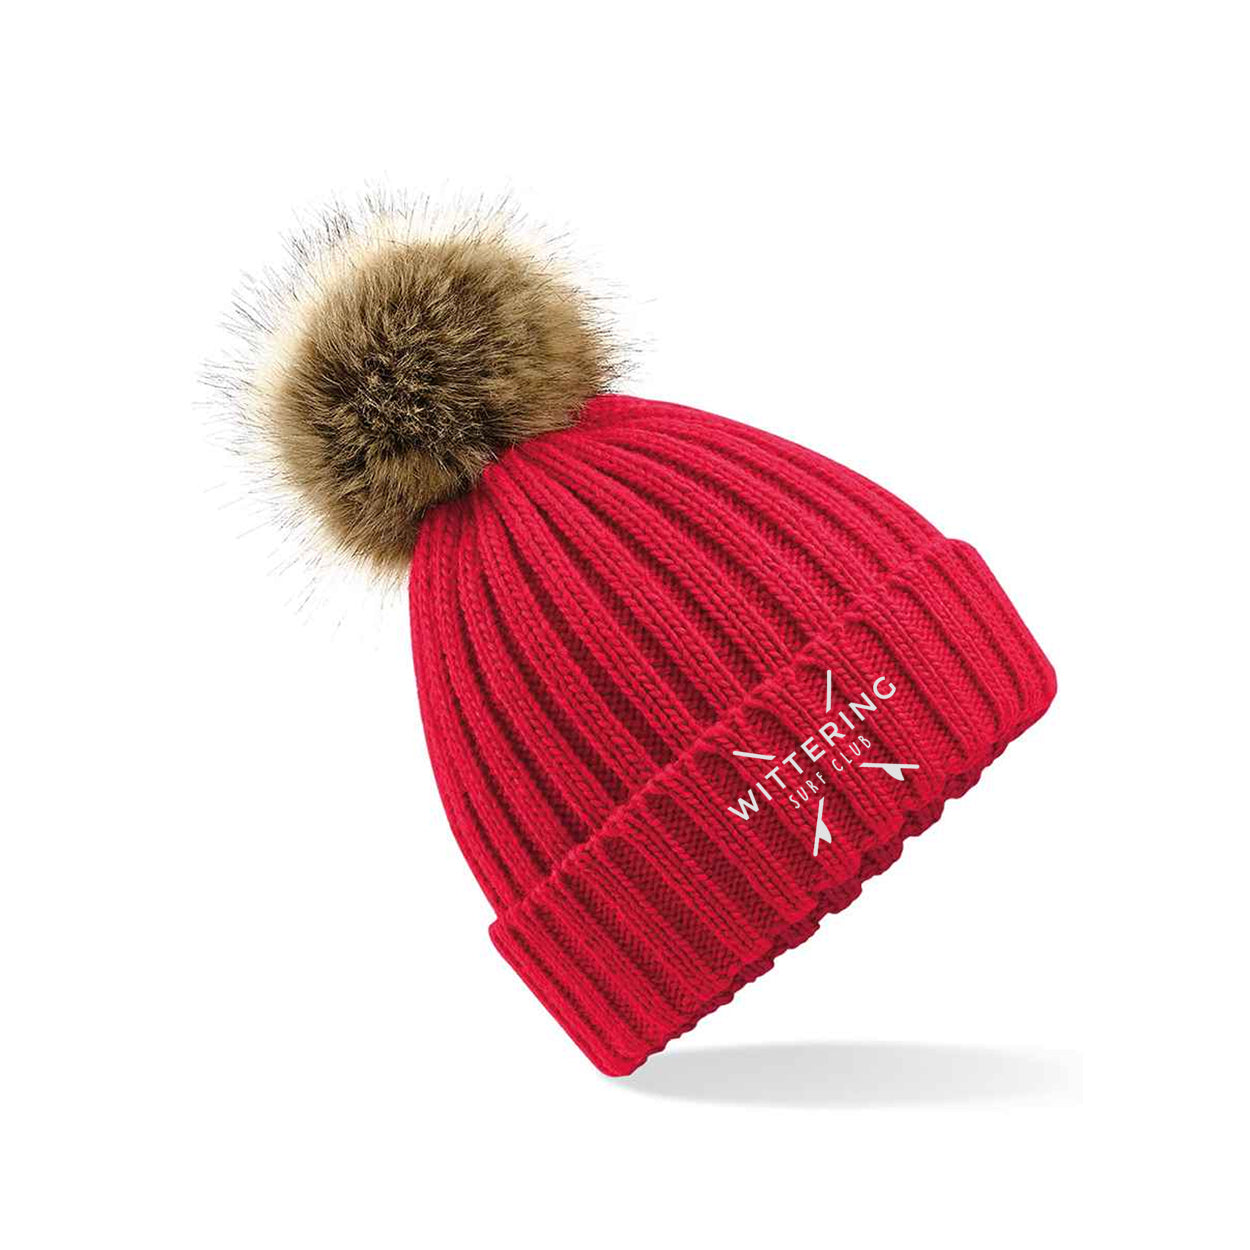 KIDS FAUX FUR POM BEANIE - RED - Wittering Surf Shop